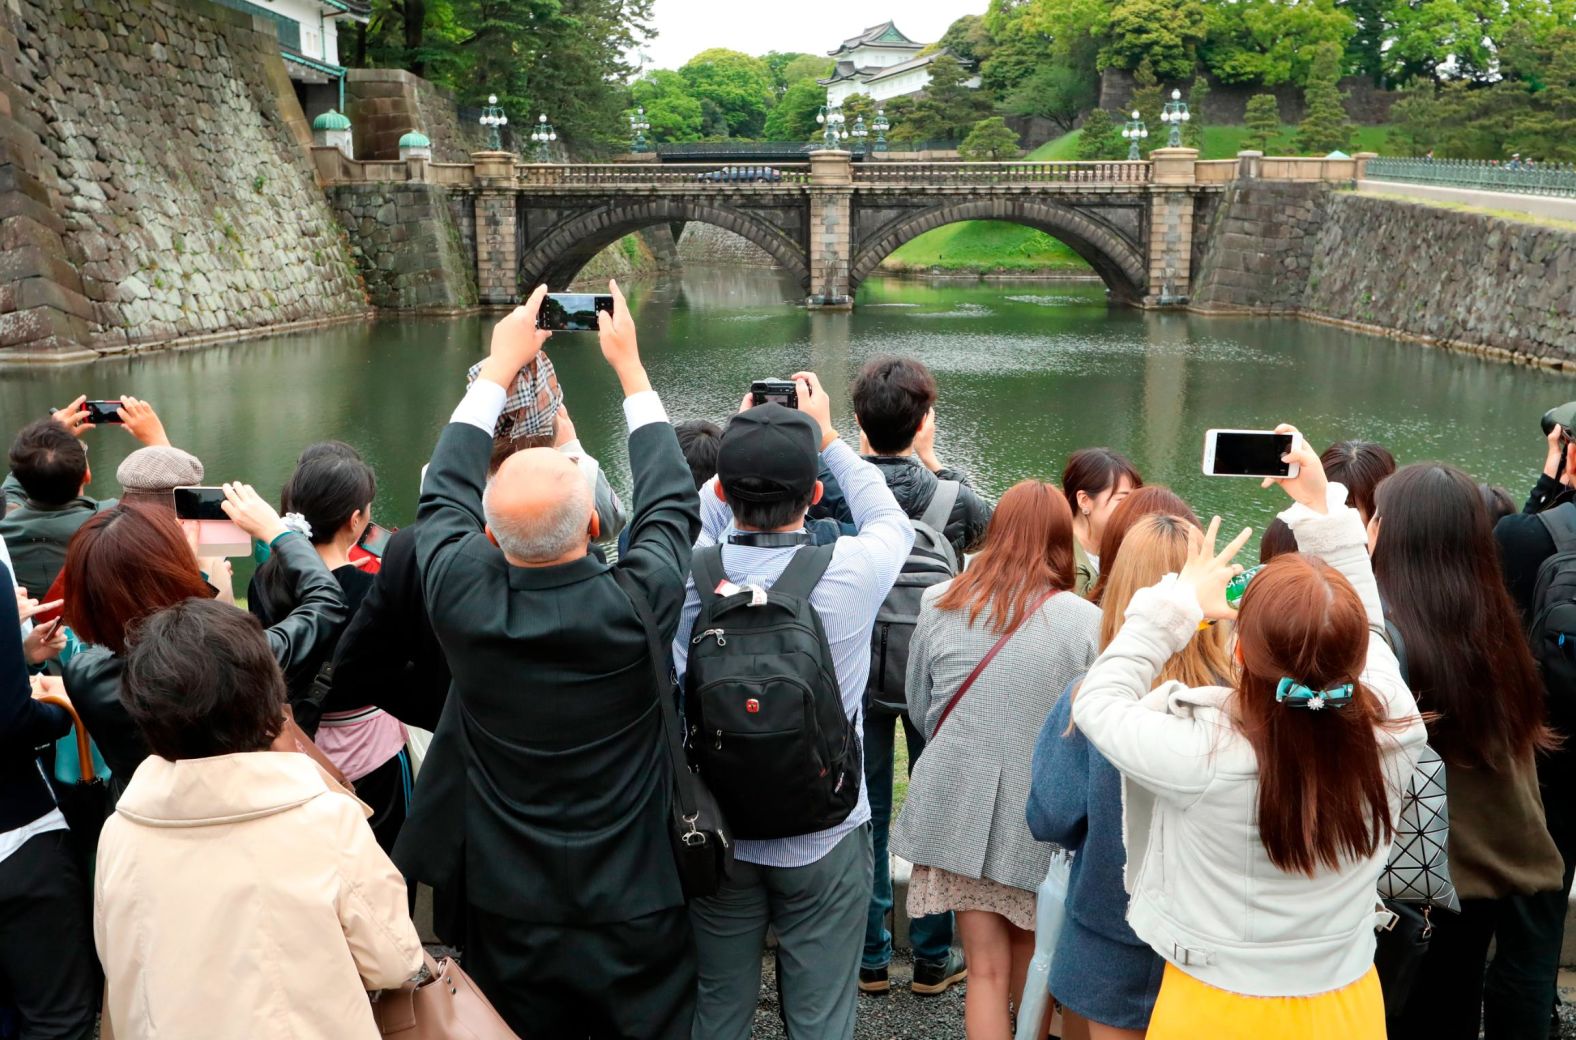 People take photos of the famous double bridge at the Imperial Palace compound.